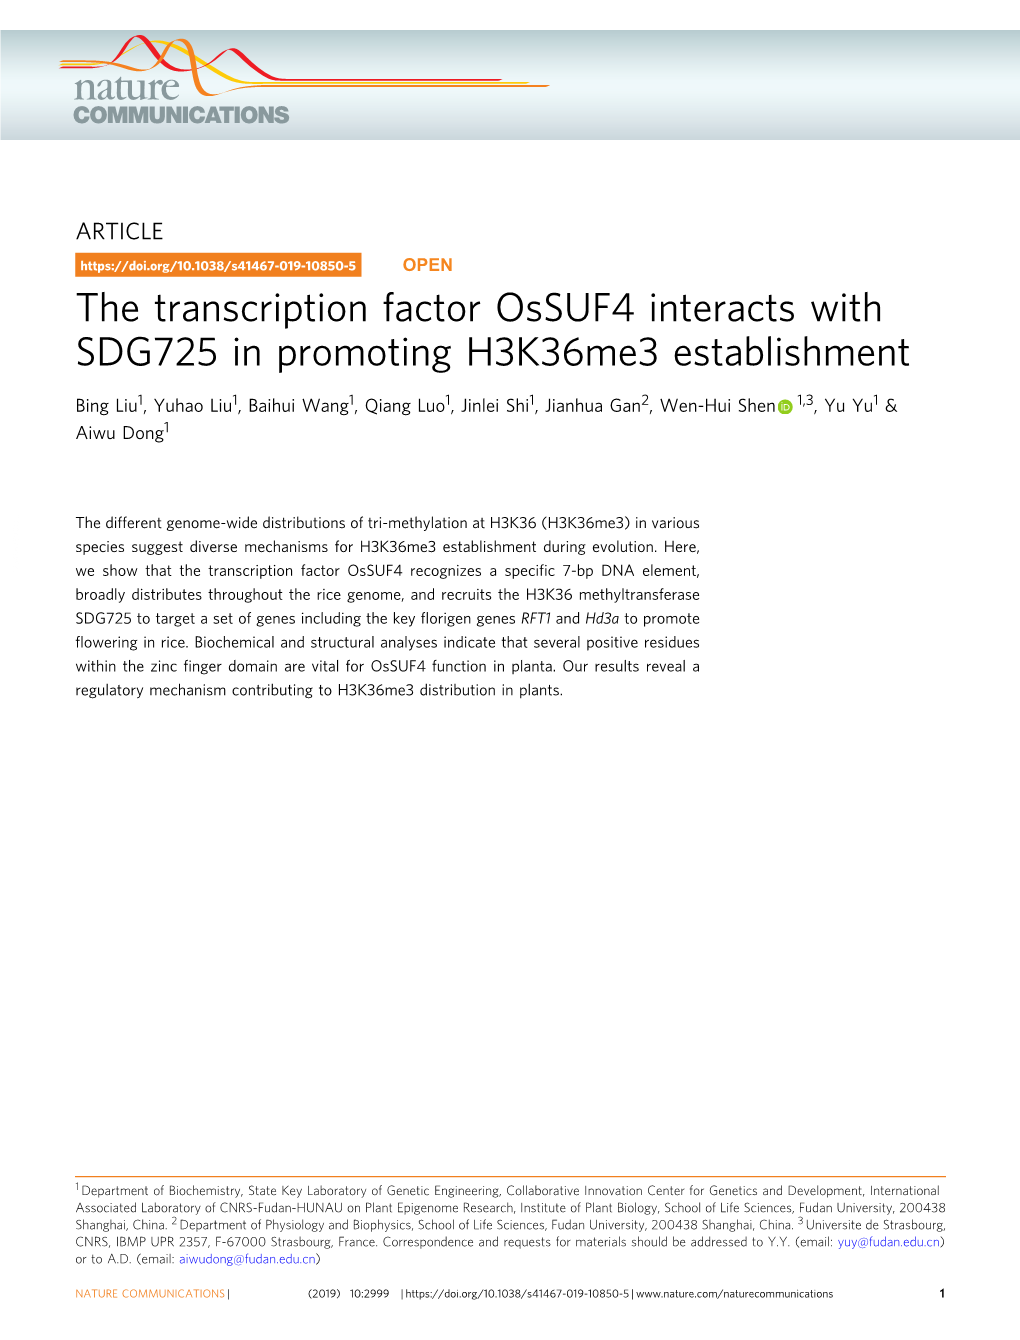 The Transcription Factor Ossuf4 Interacts with SDG725 in Promoting H3k36me3 Establishment